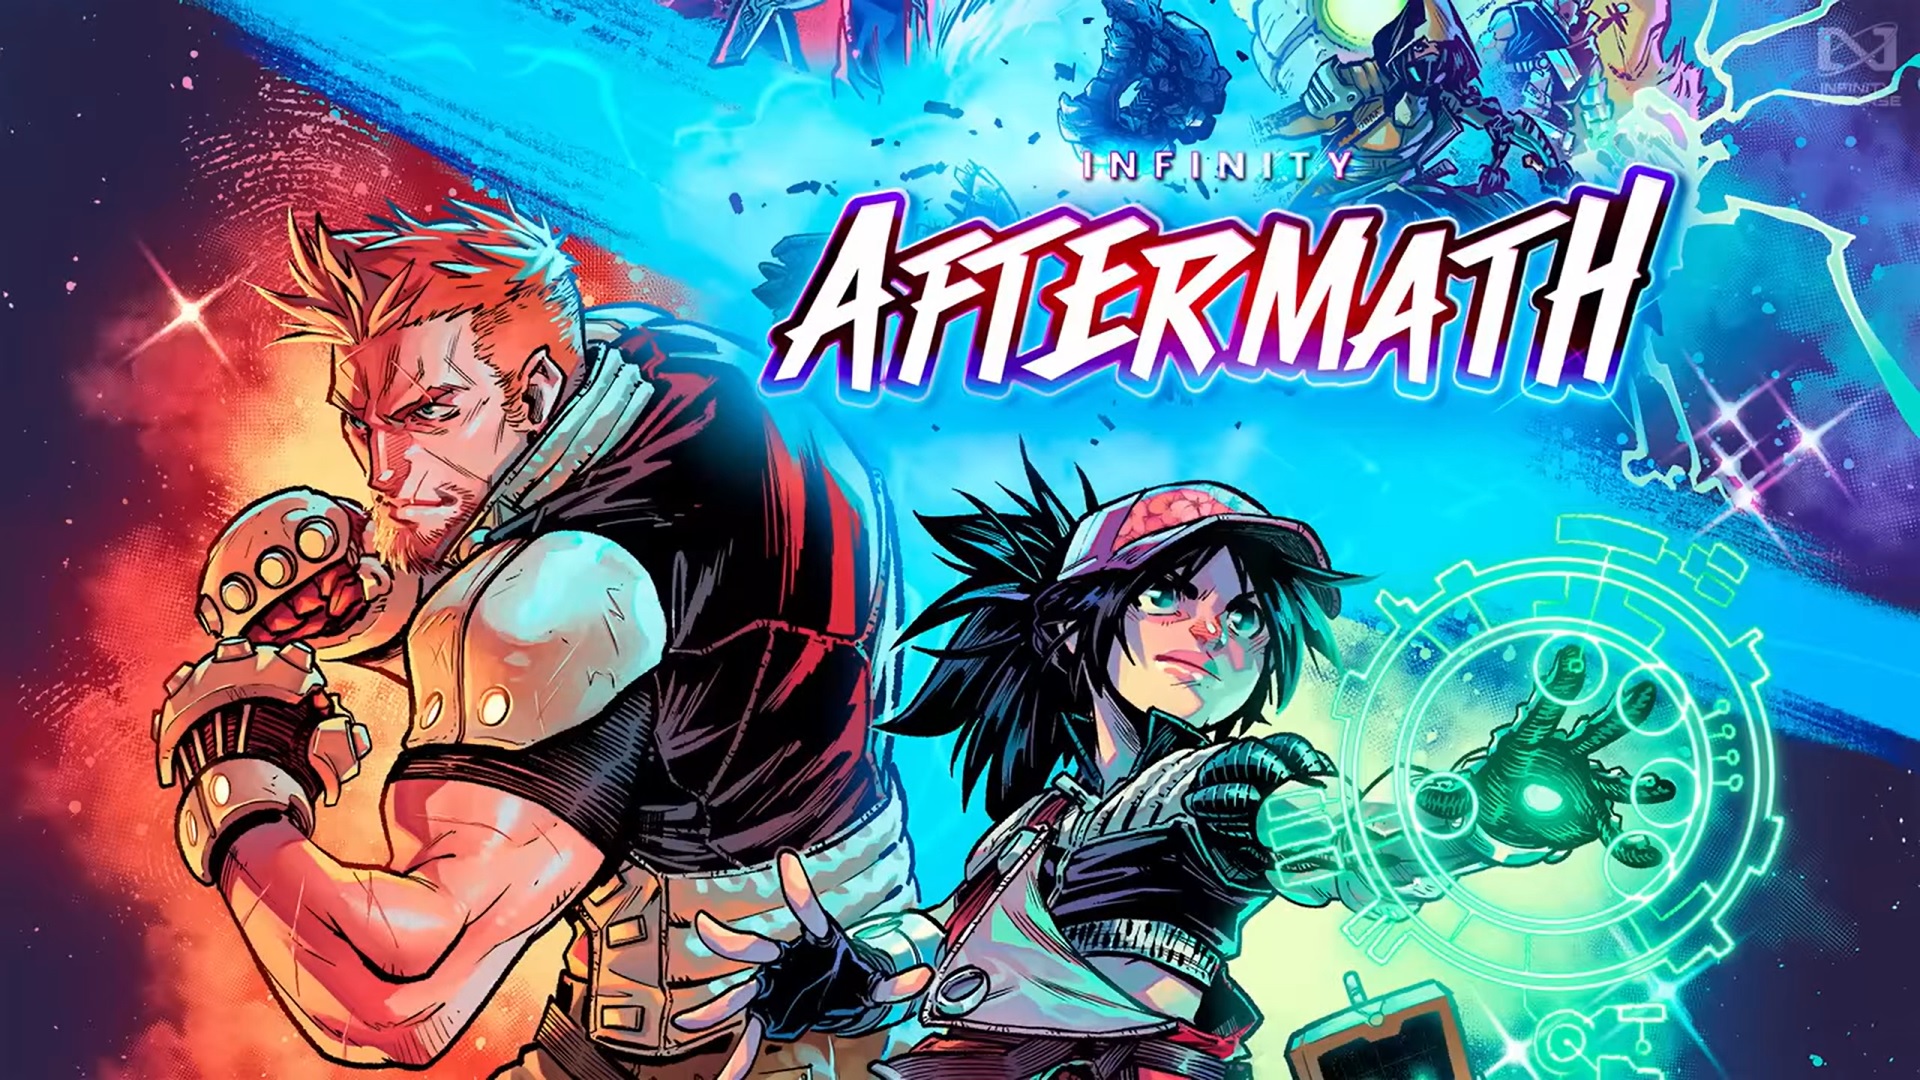 Aftermath Art - Infinity